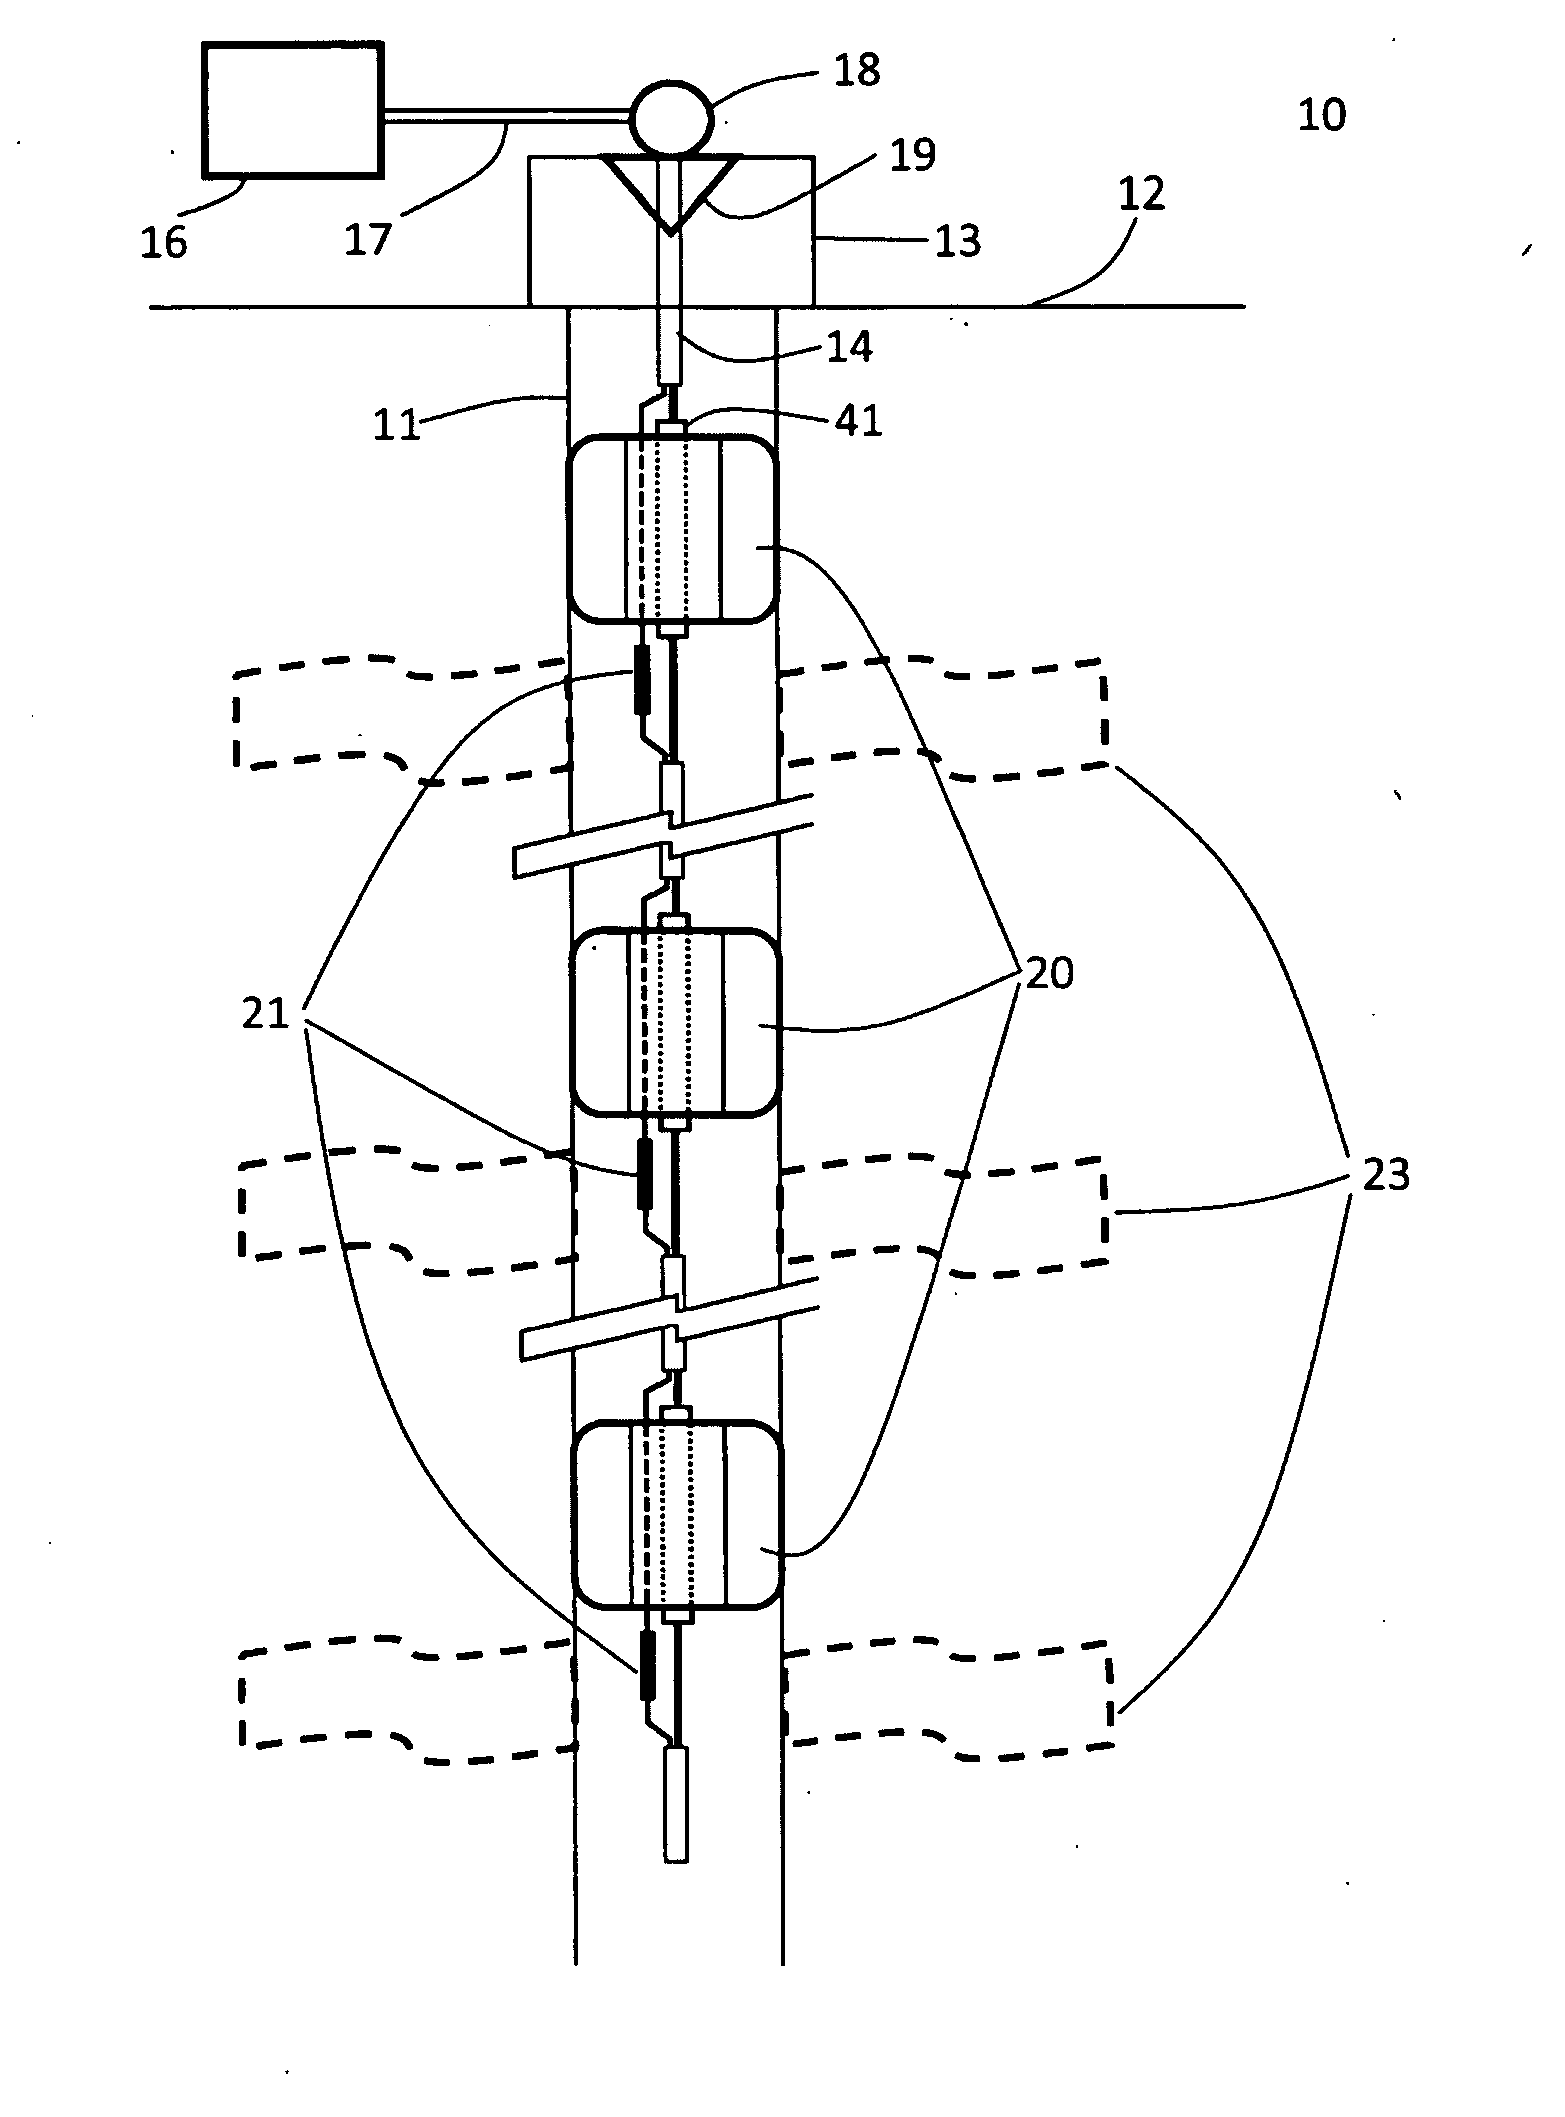 Apparatus, System And Method For Multi Zone Monitoring In Boreholes